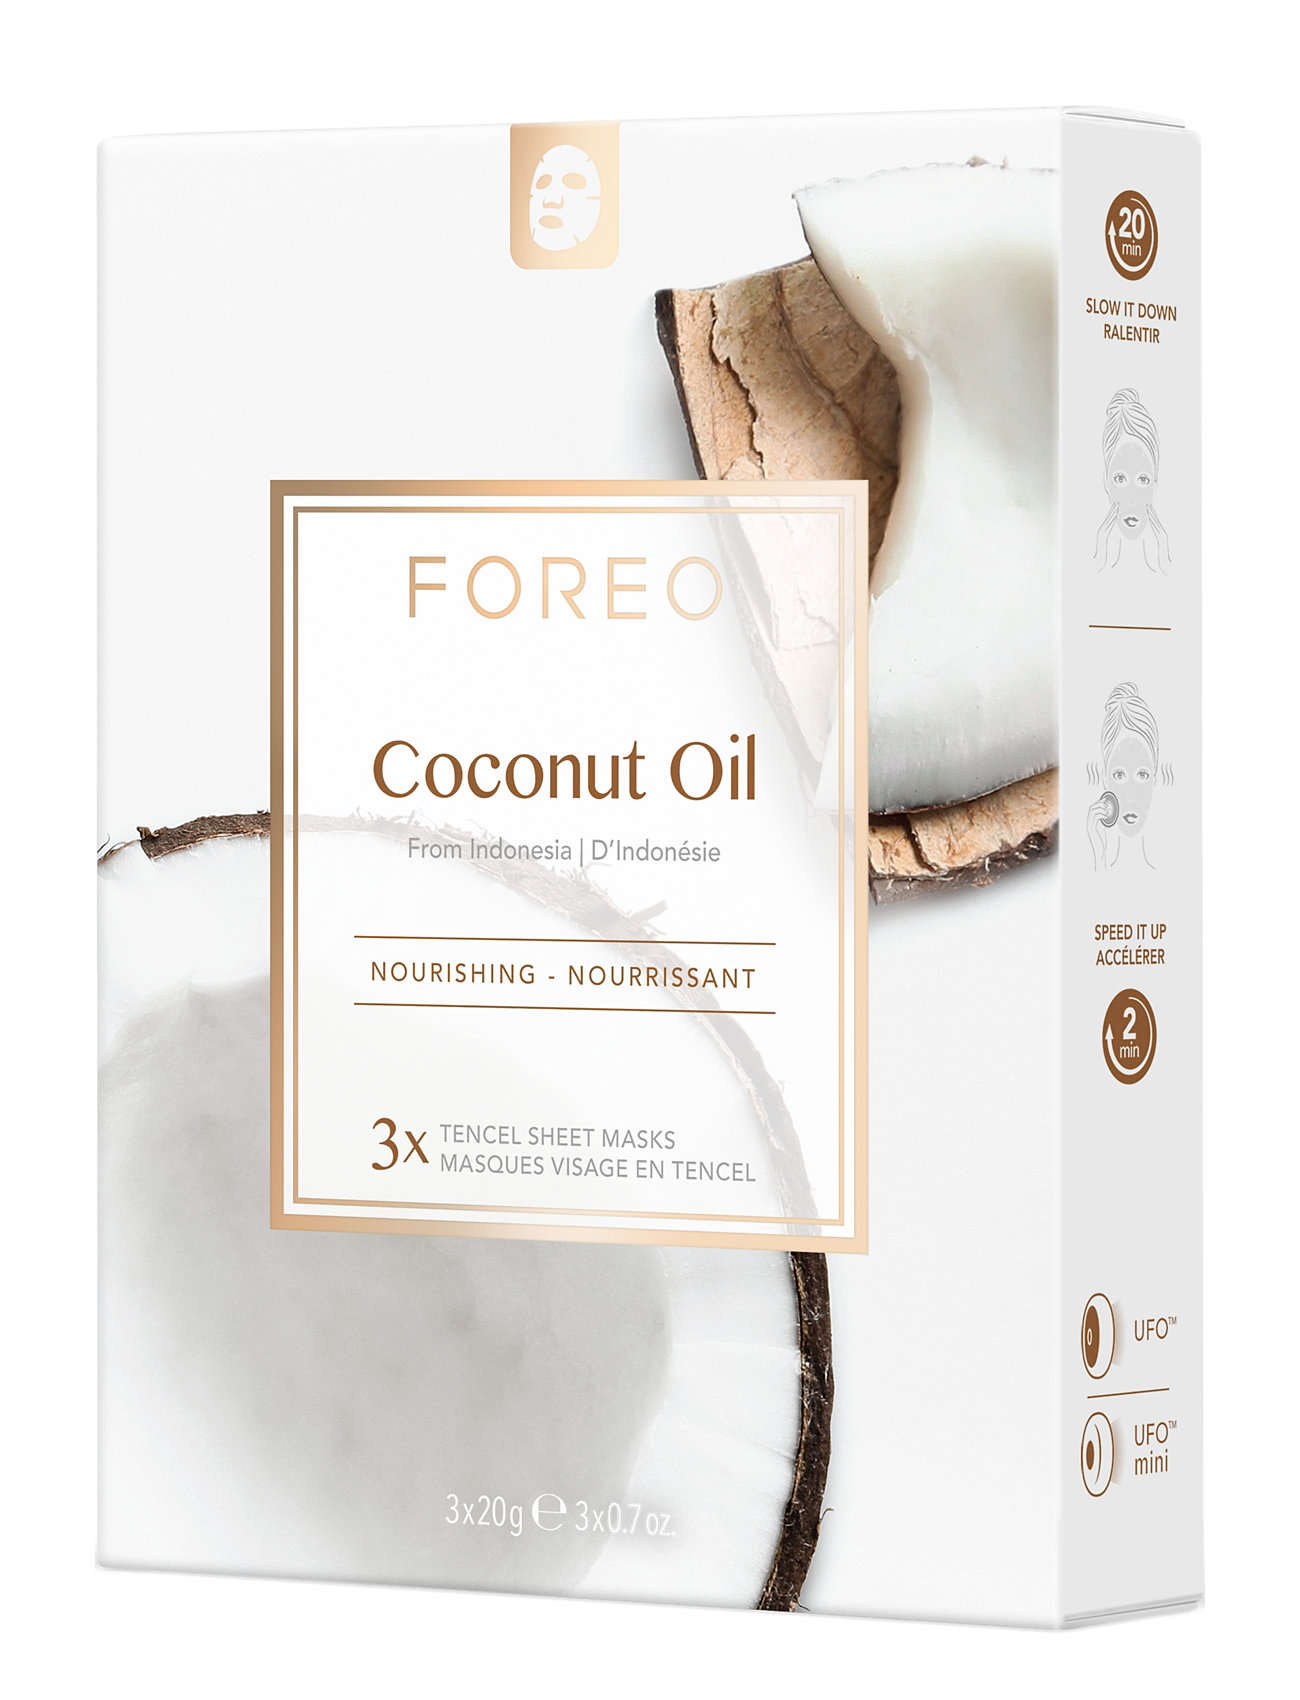 Farm To Face Coconut Oil Sheet Mask Beauty Women Skin Care Face Masks Sheetmask Nude Foreo